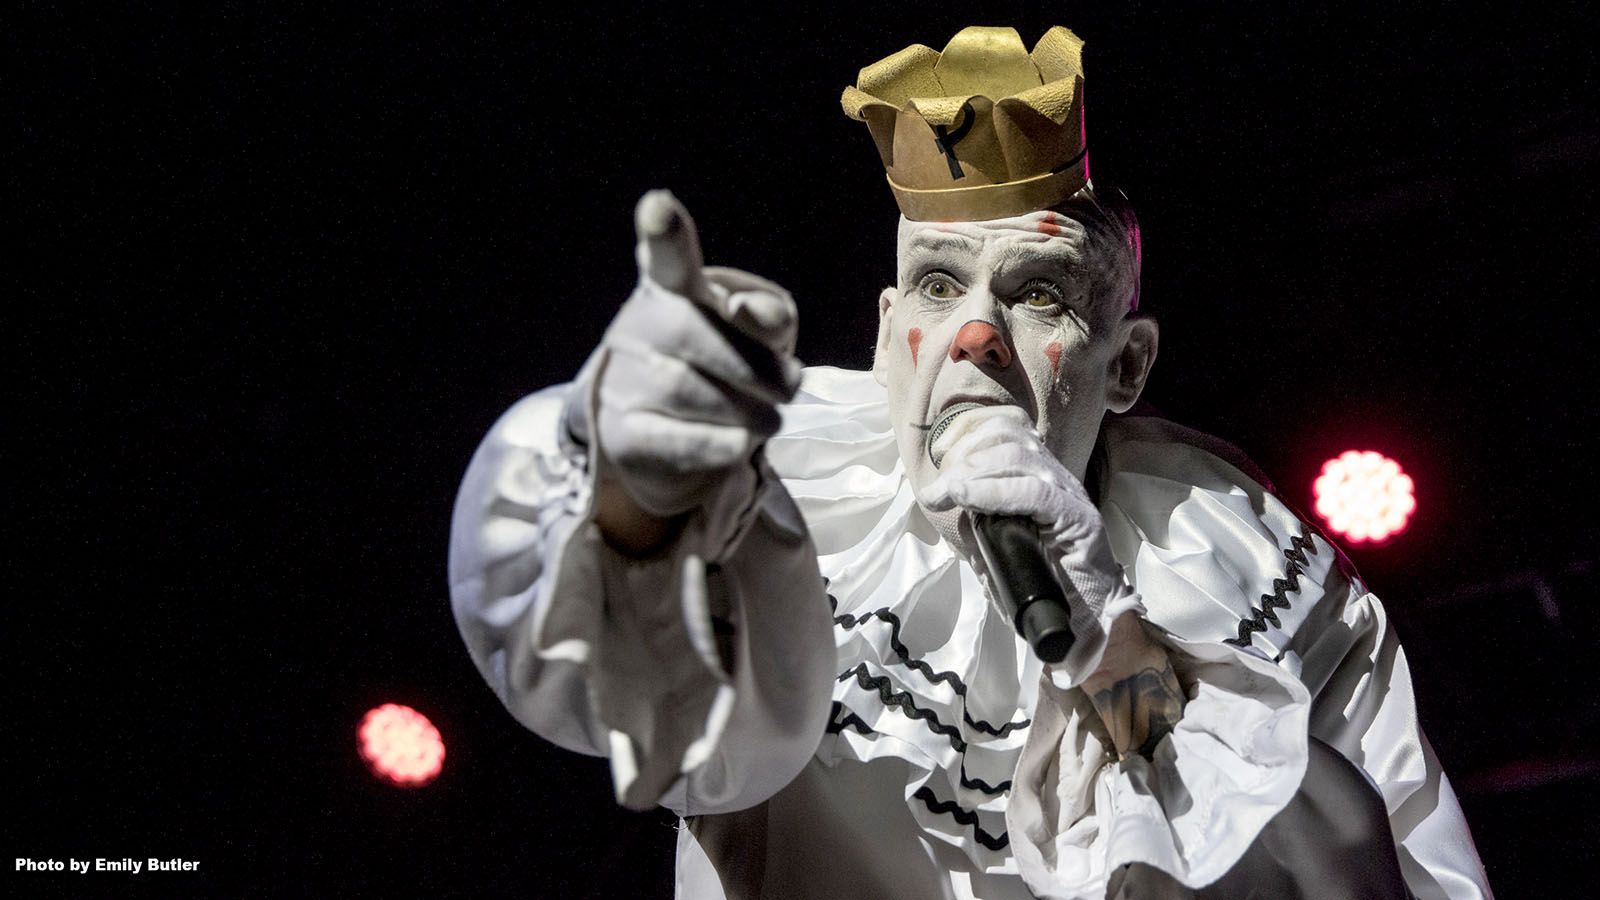 Puddles Pity Party will bring his unique show to The Clyde Theatre on Sunday, Jan. 21.